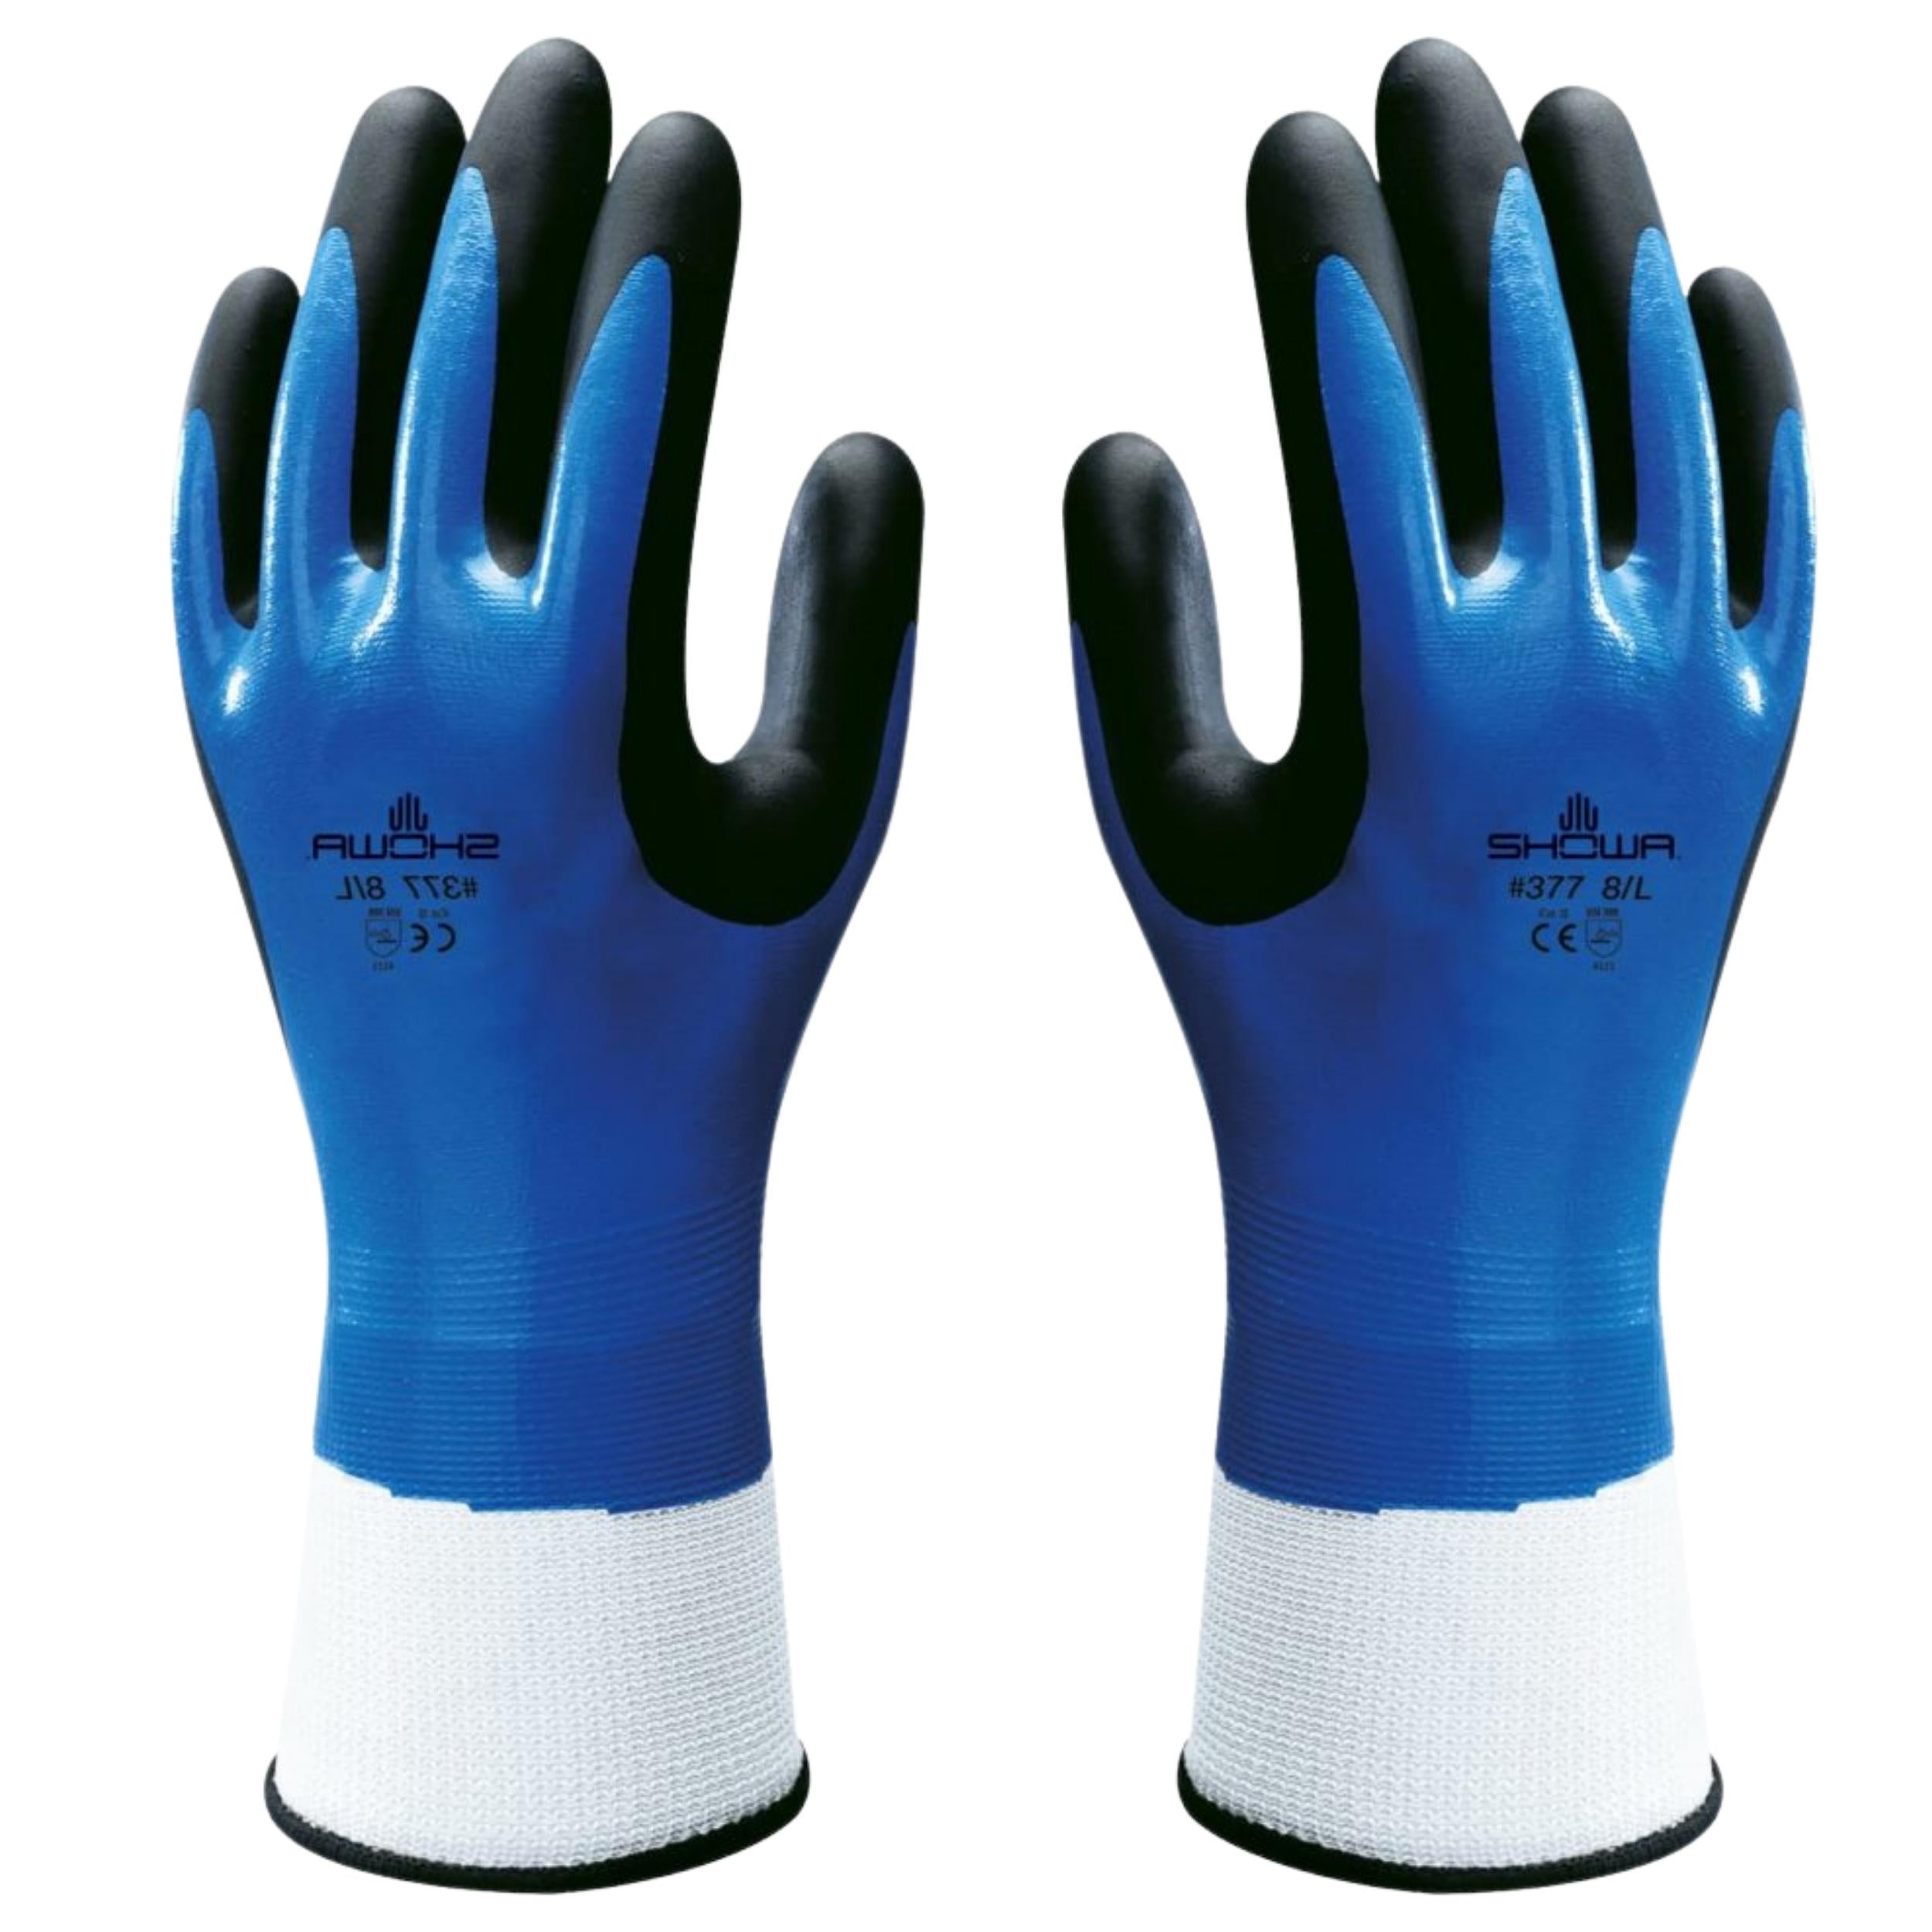 SHOWA 377: Chemical-Resistant Gloves 3 PAIR